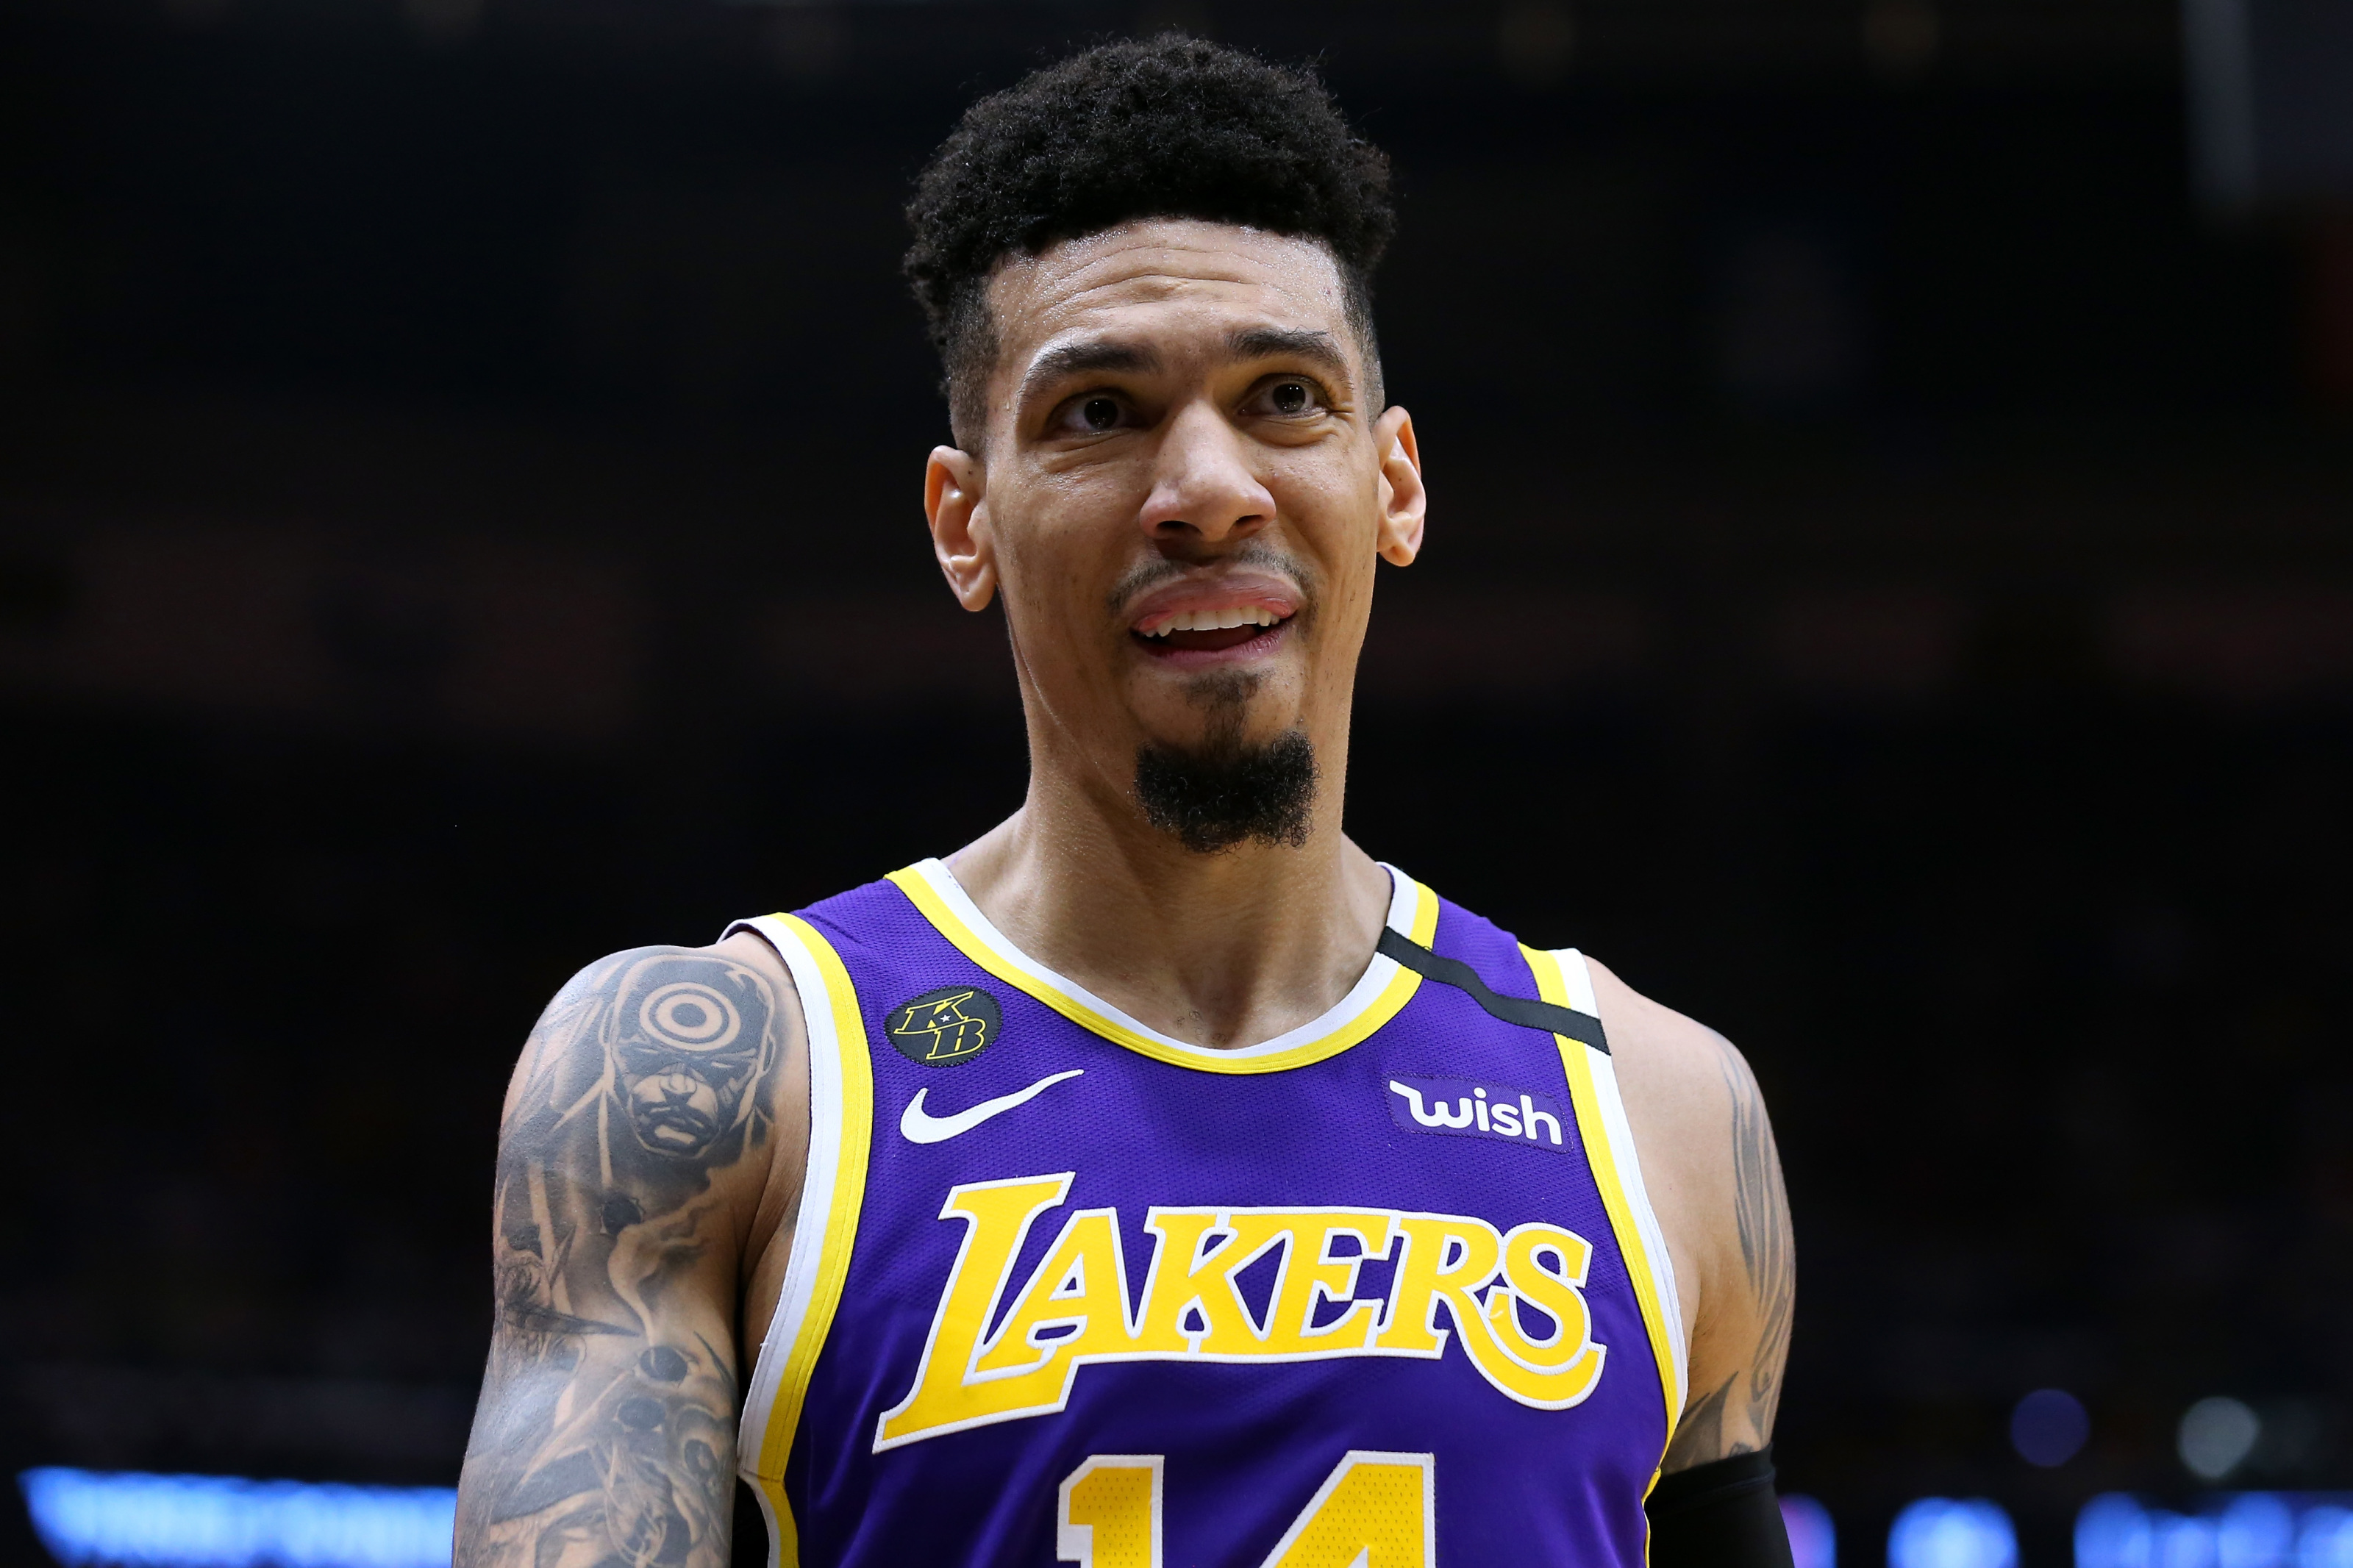 Comforts of NBA bubble not lost on Lakers' Danny Green